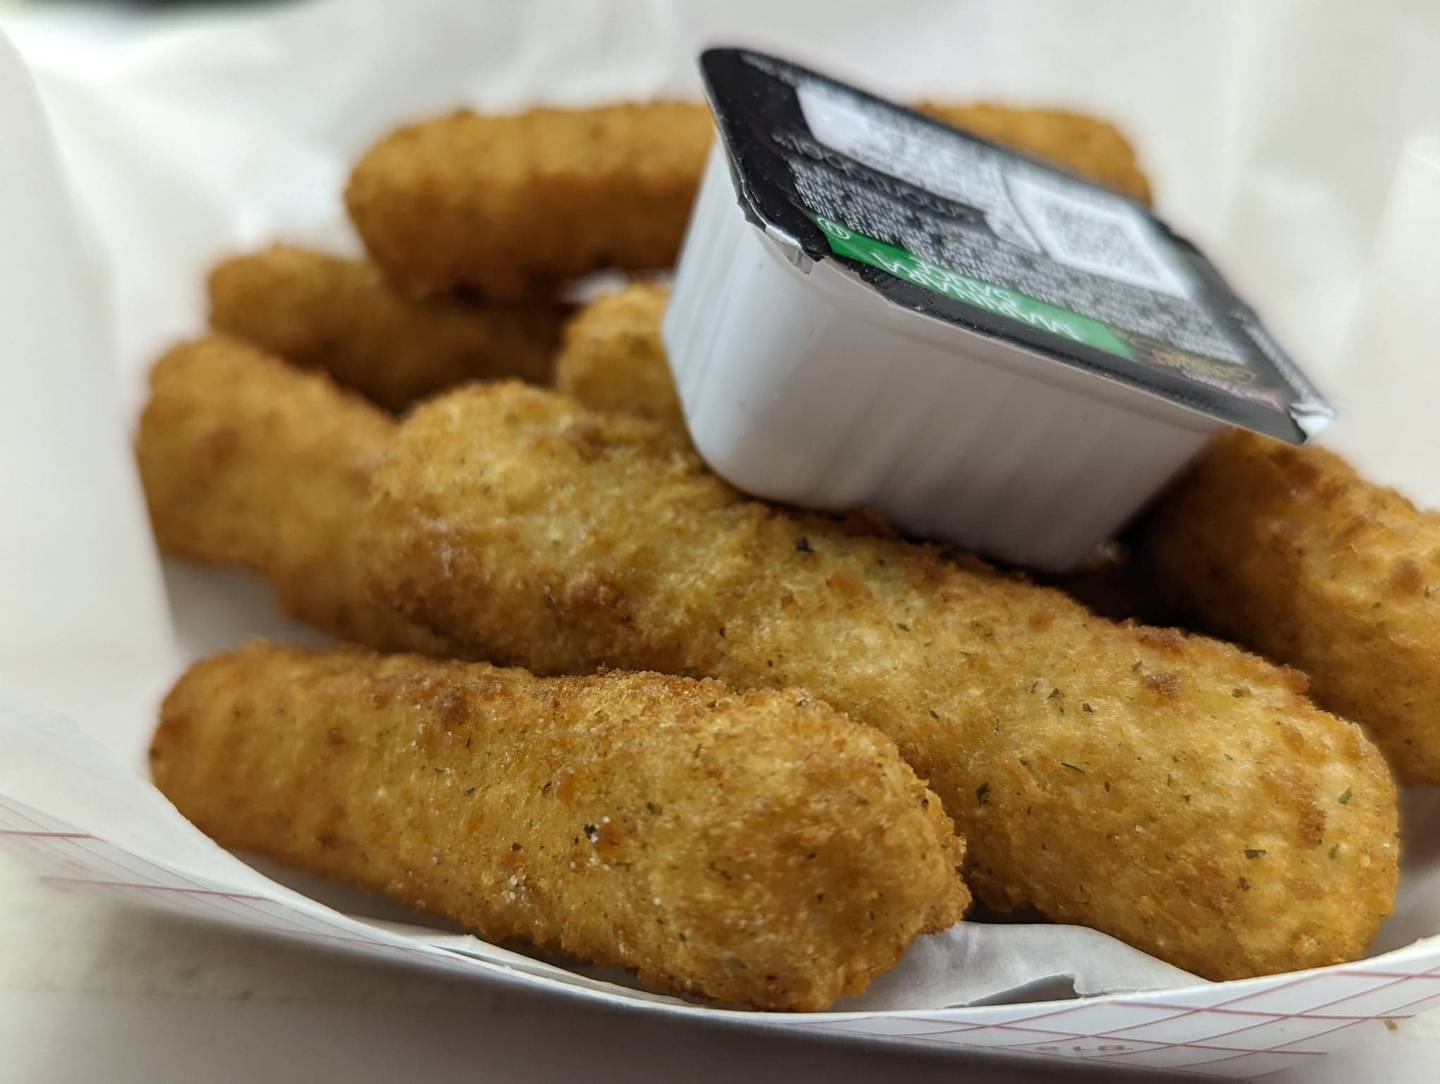 The Knights of Columbus Holy Trinity Council No. 4400 on Joliet's East side offer a choice of four different appetizers at its fish fries, all for $7.95 each: mozzarella sticks with marinara sauce, onion Rings, fried mushrooms and macaroni and cheese bites. Pictured are the cheese sticks.